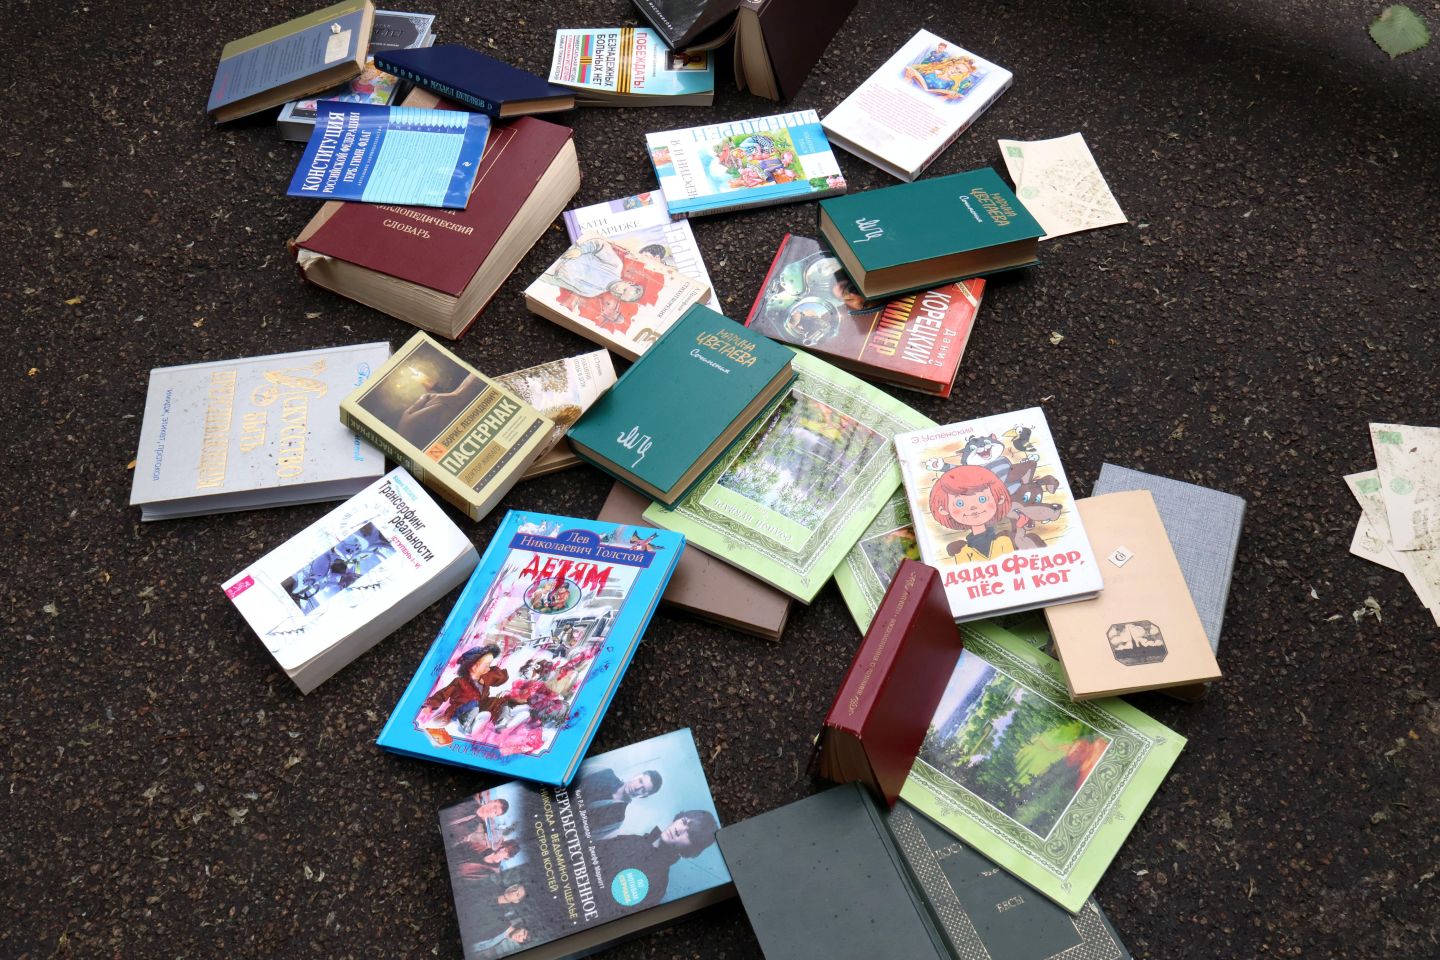 A pile of books on the street